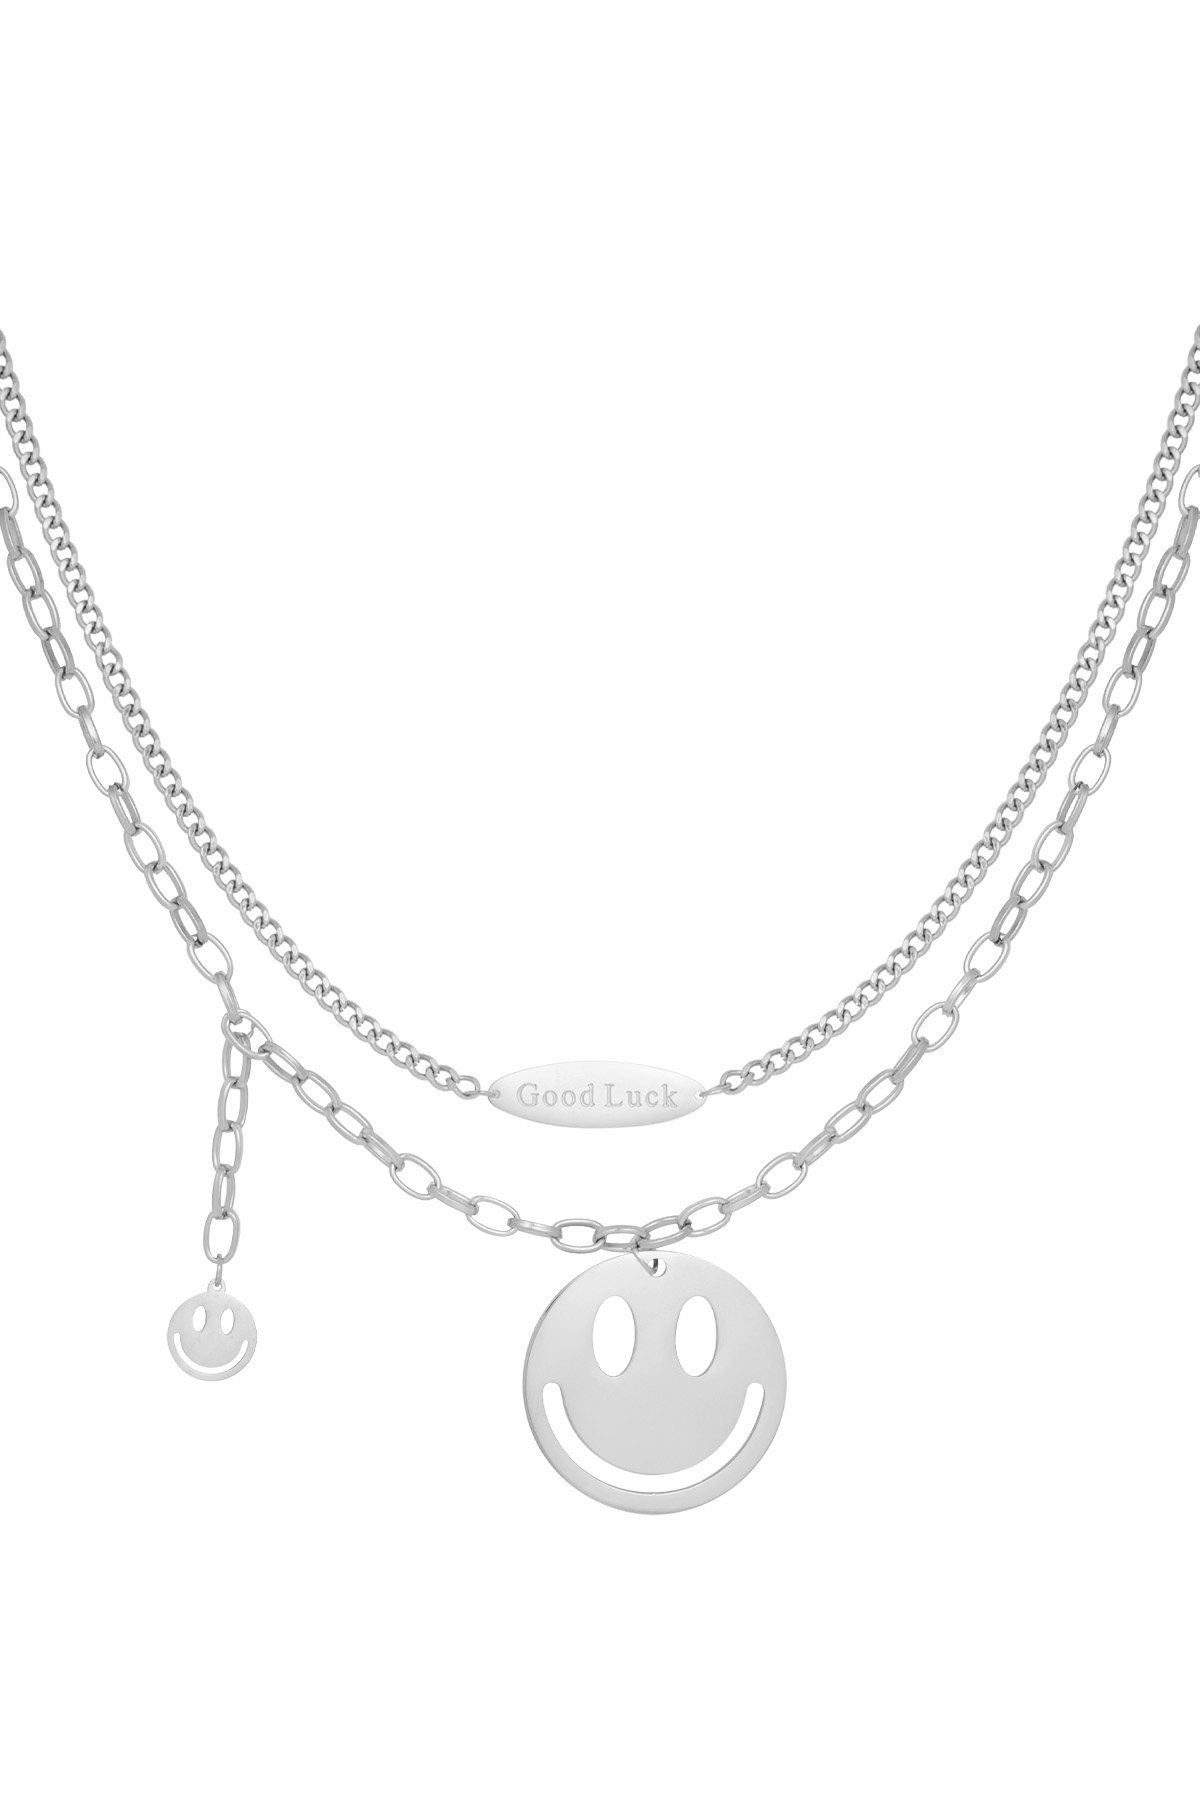 Happy life ketting - zilver h5 